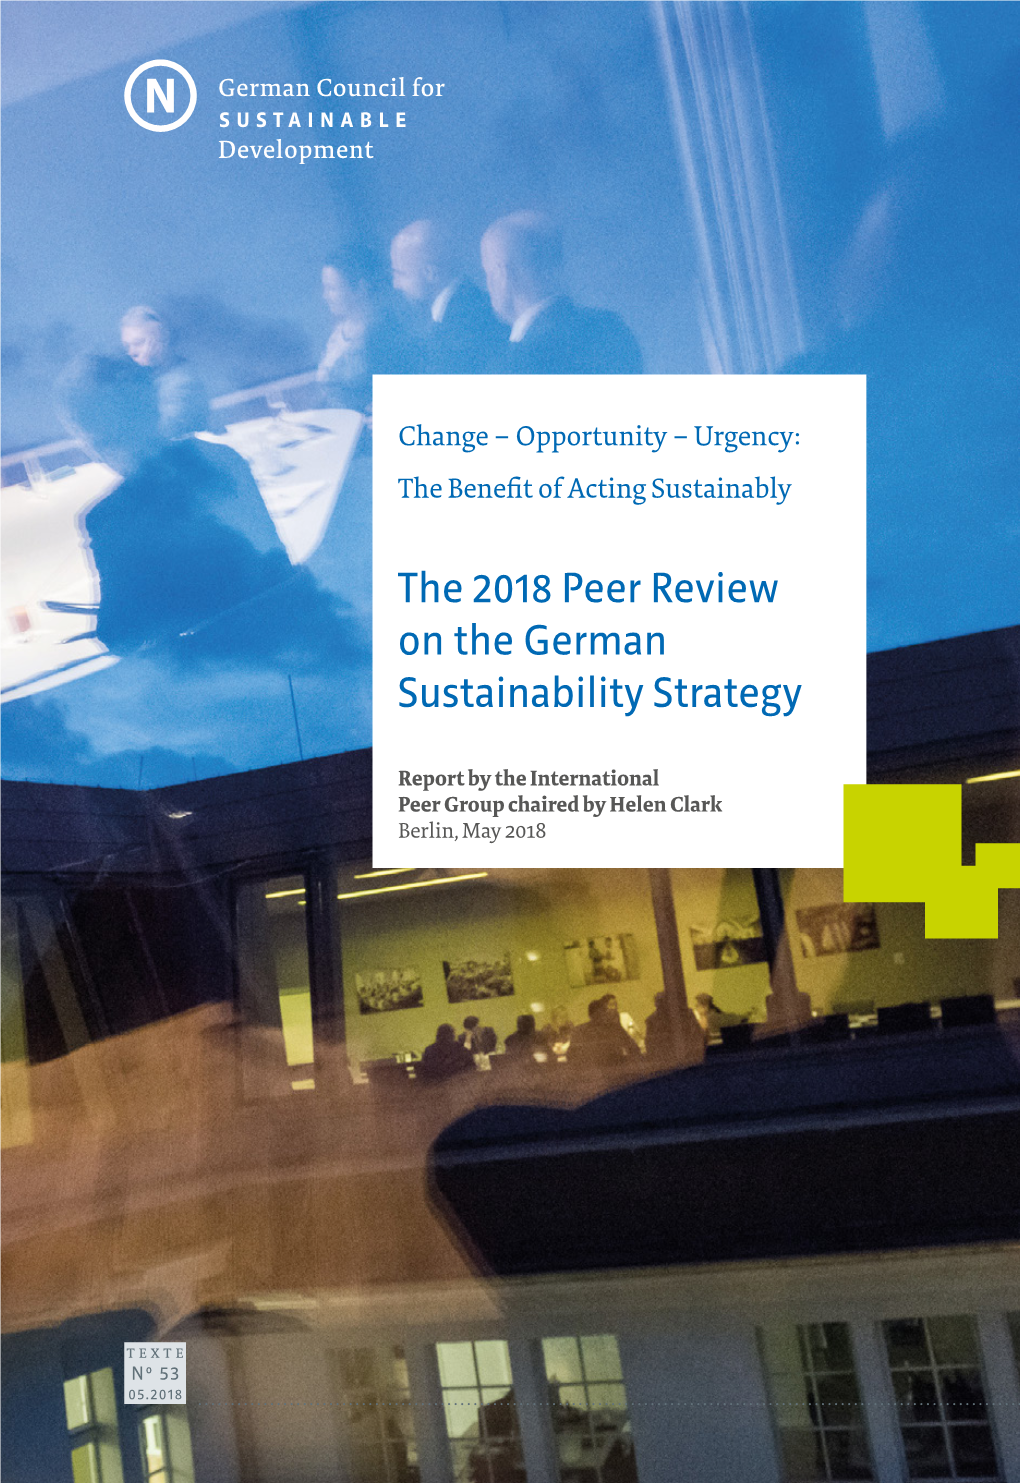 The 2018 Peer Review on the German Sustainability Strategy